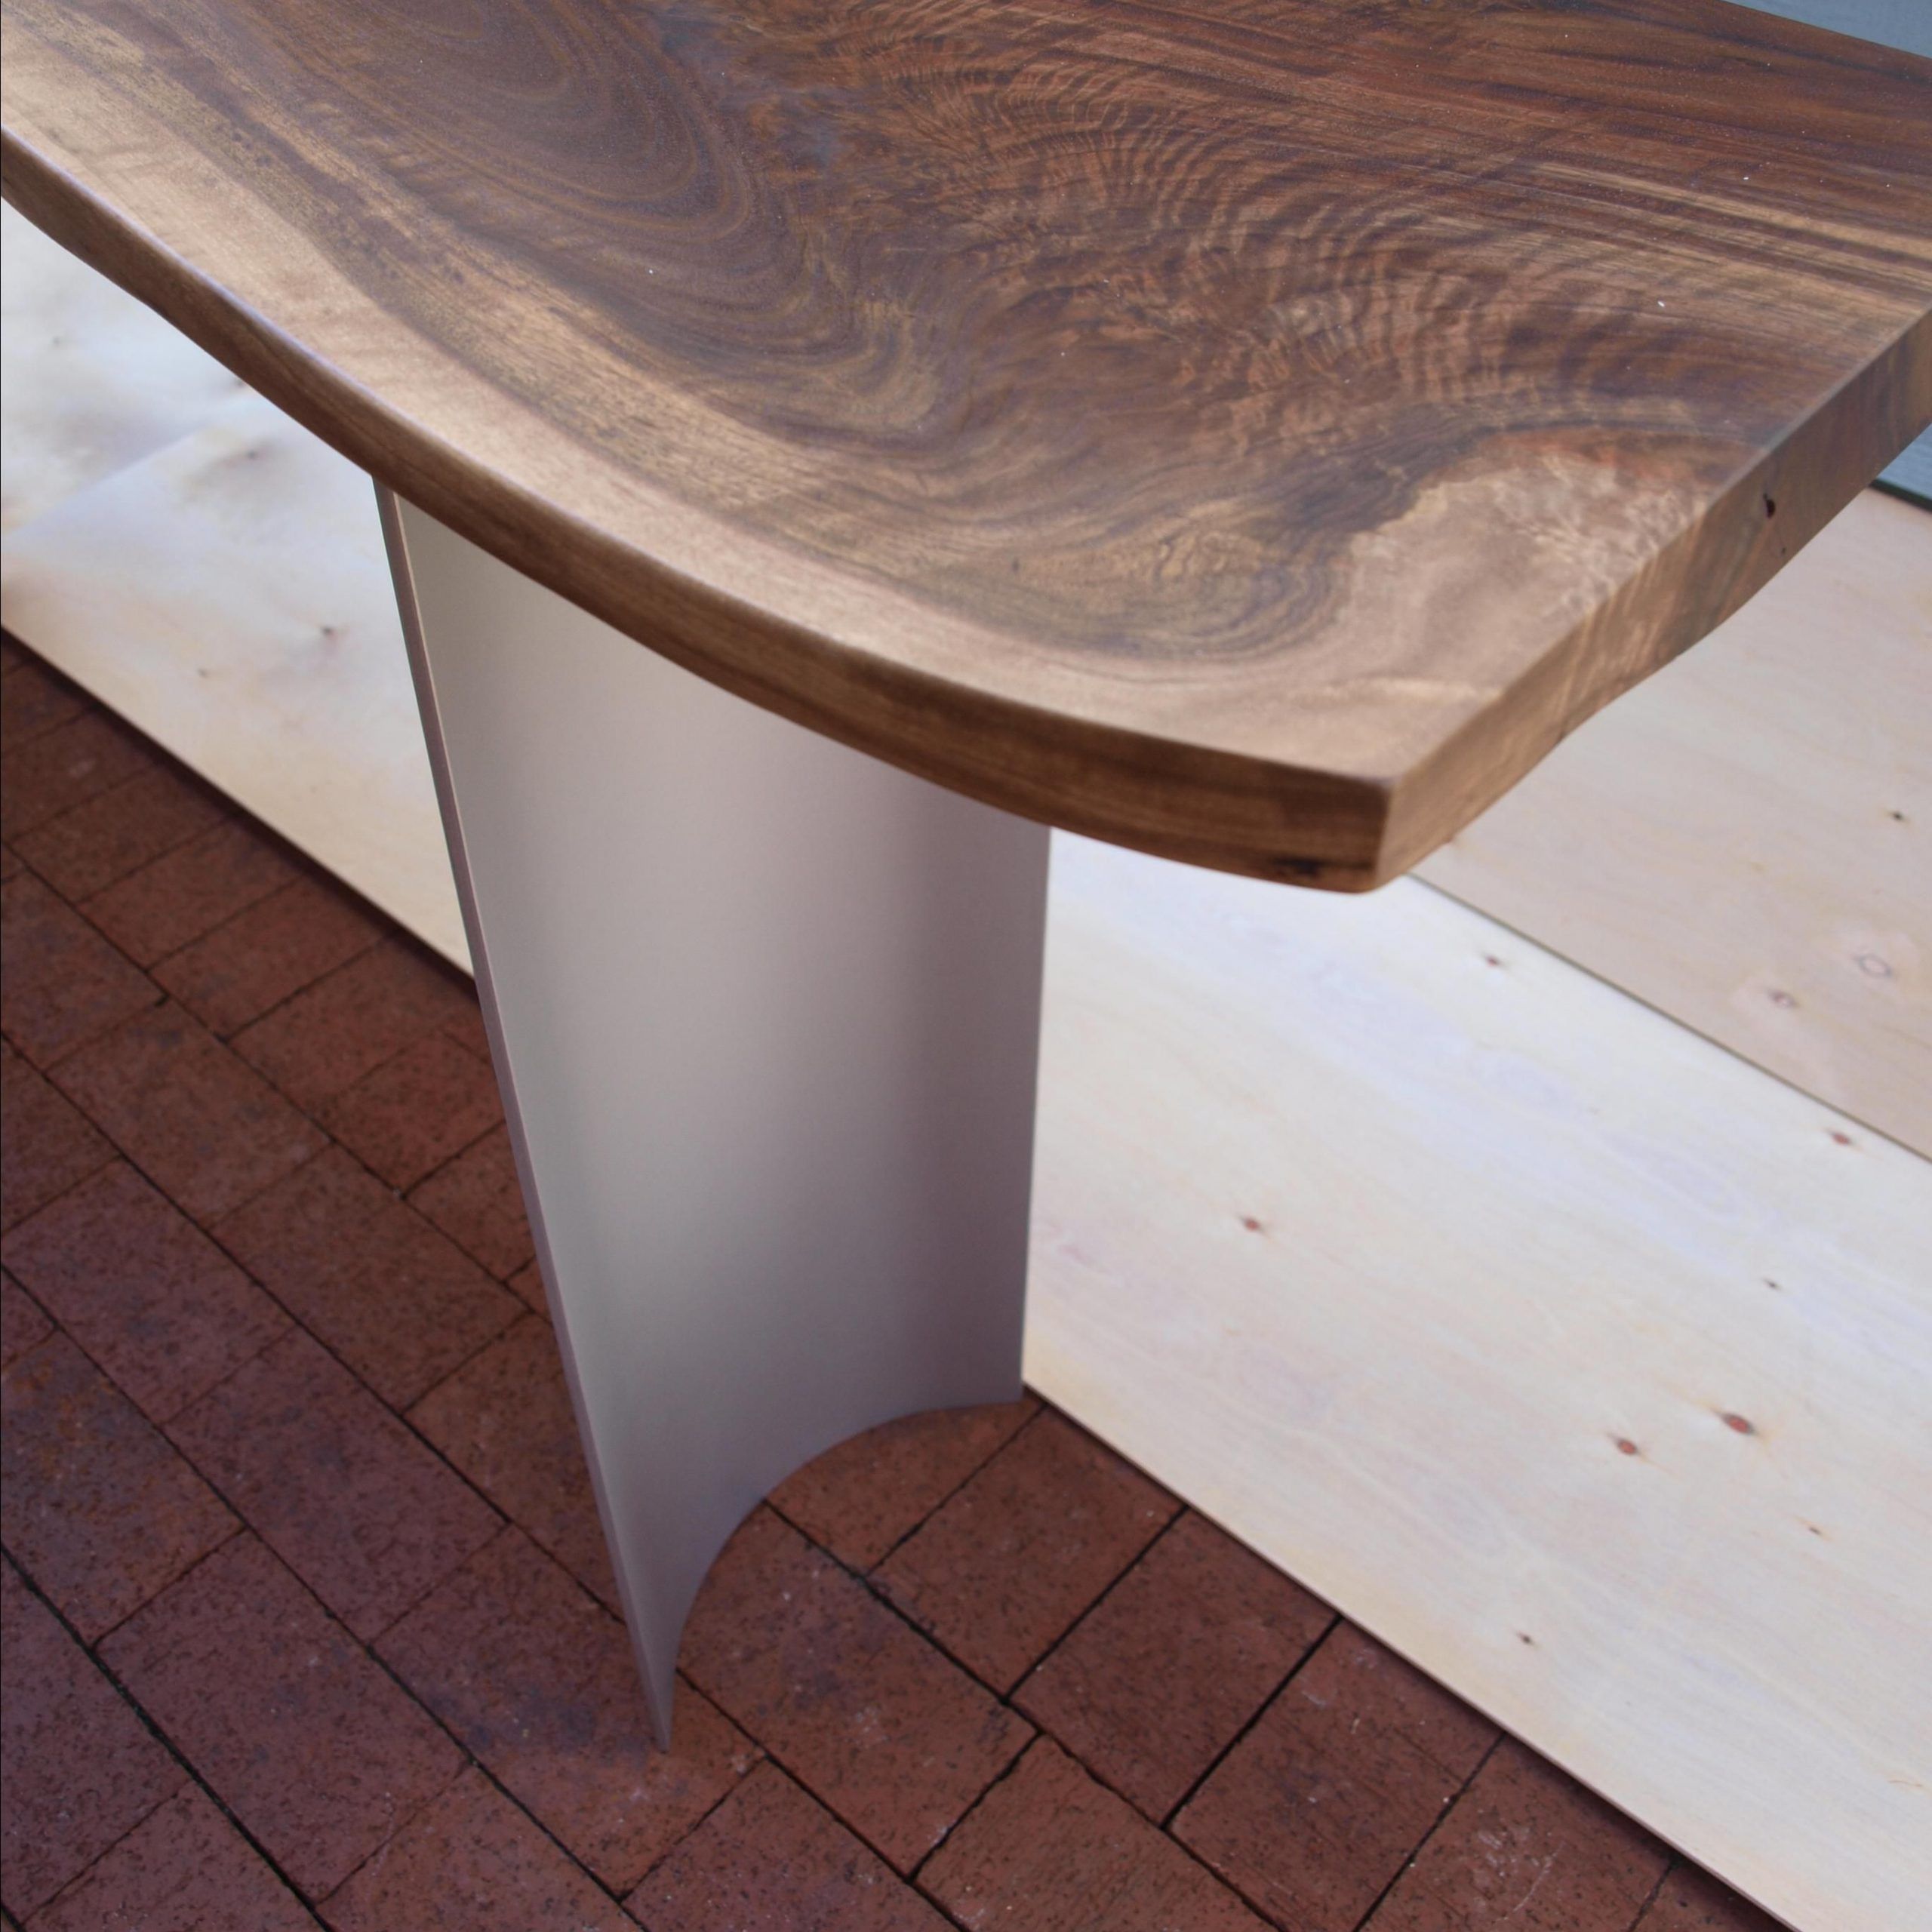 Handmade Live Edge Walnut Console Table With Curved Steel Base Regarding Walnut Console Tables (View 4 of 20)